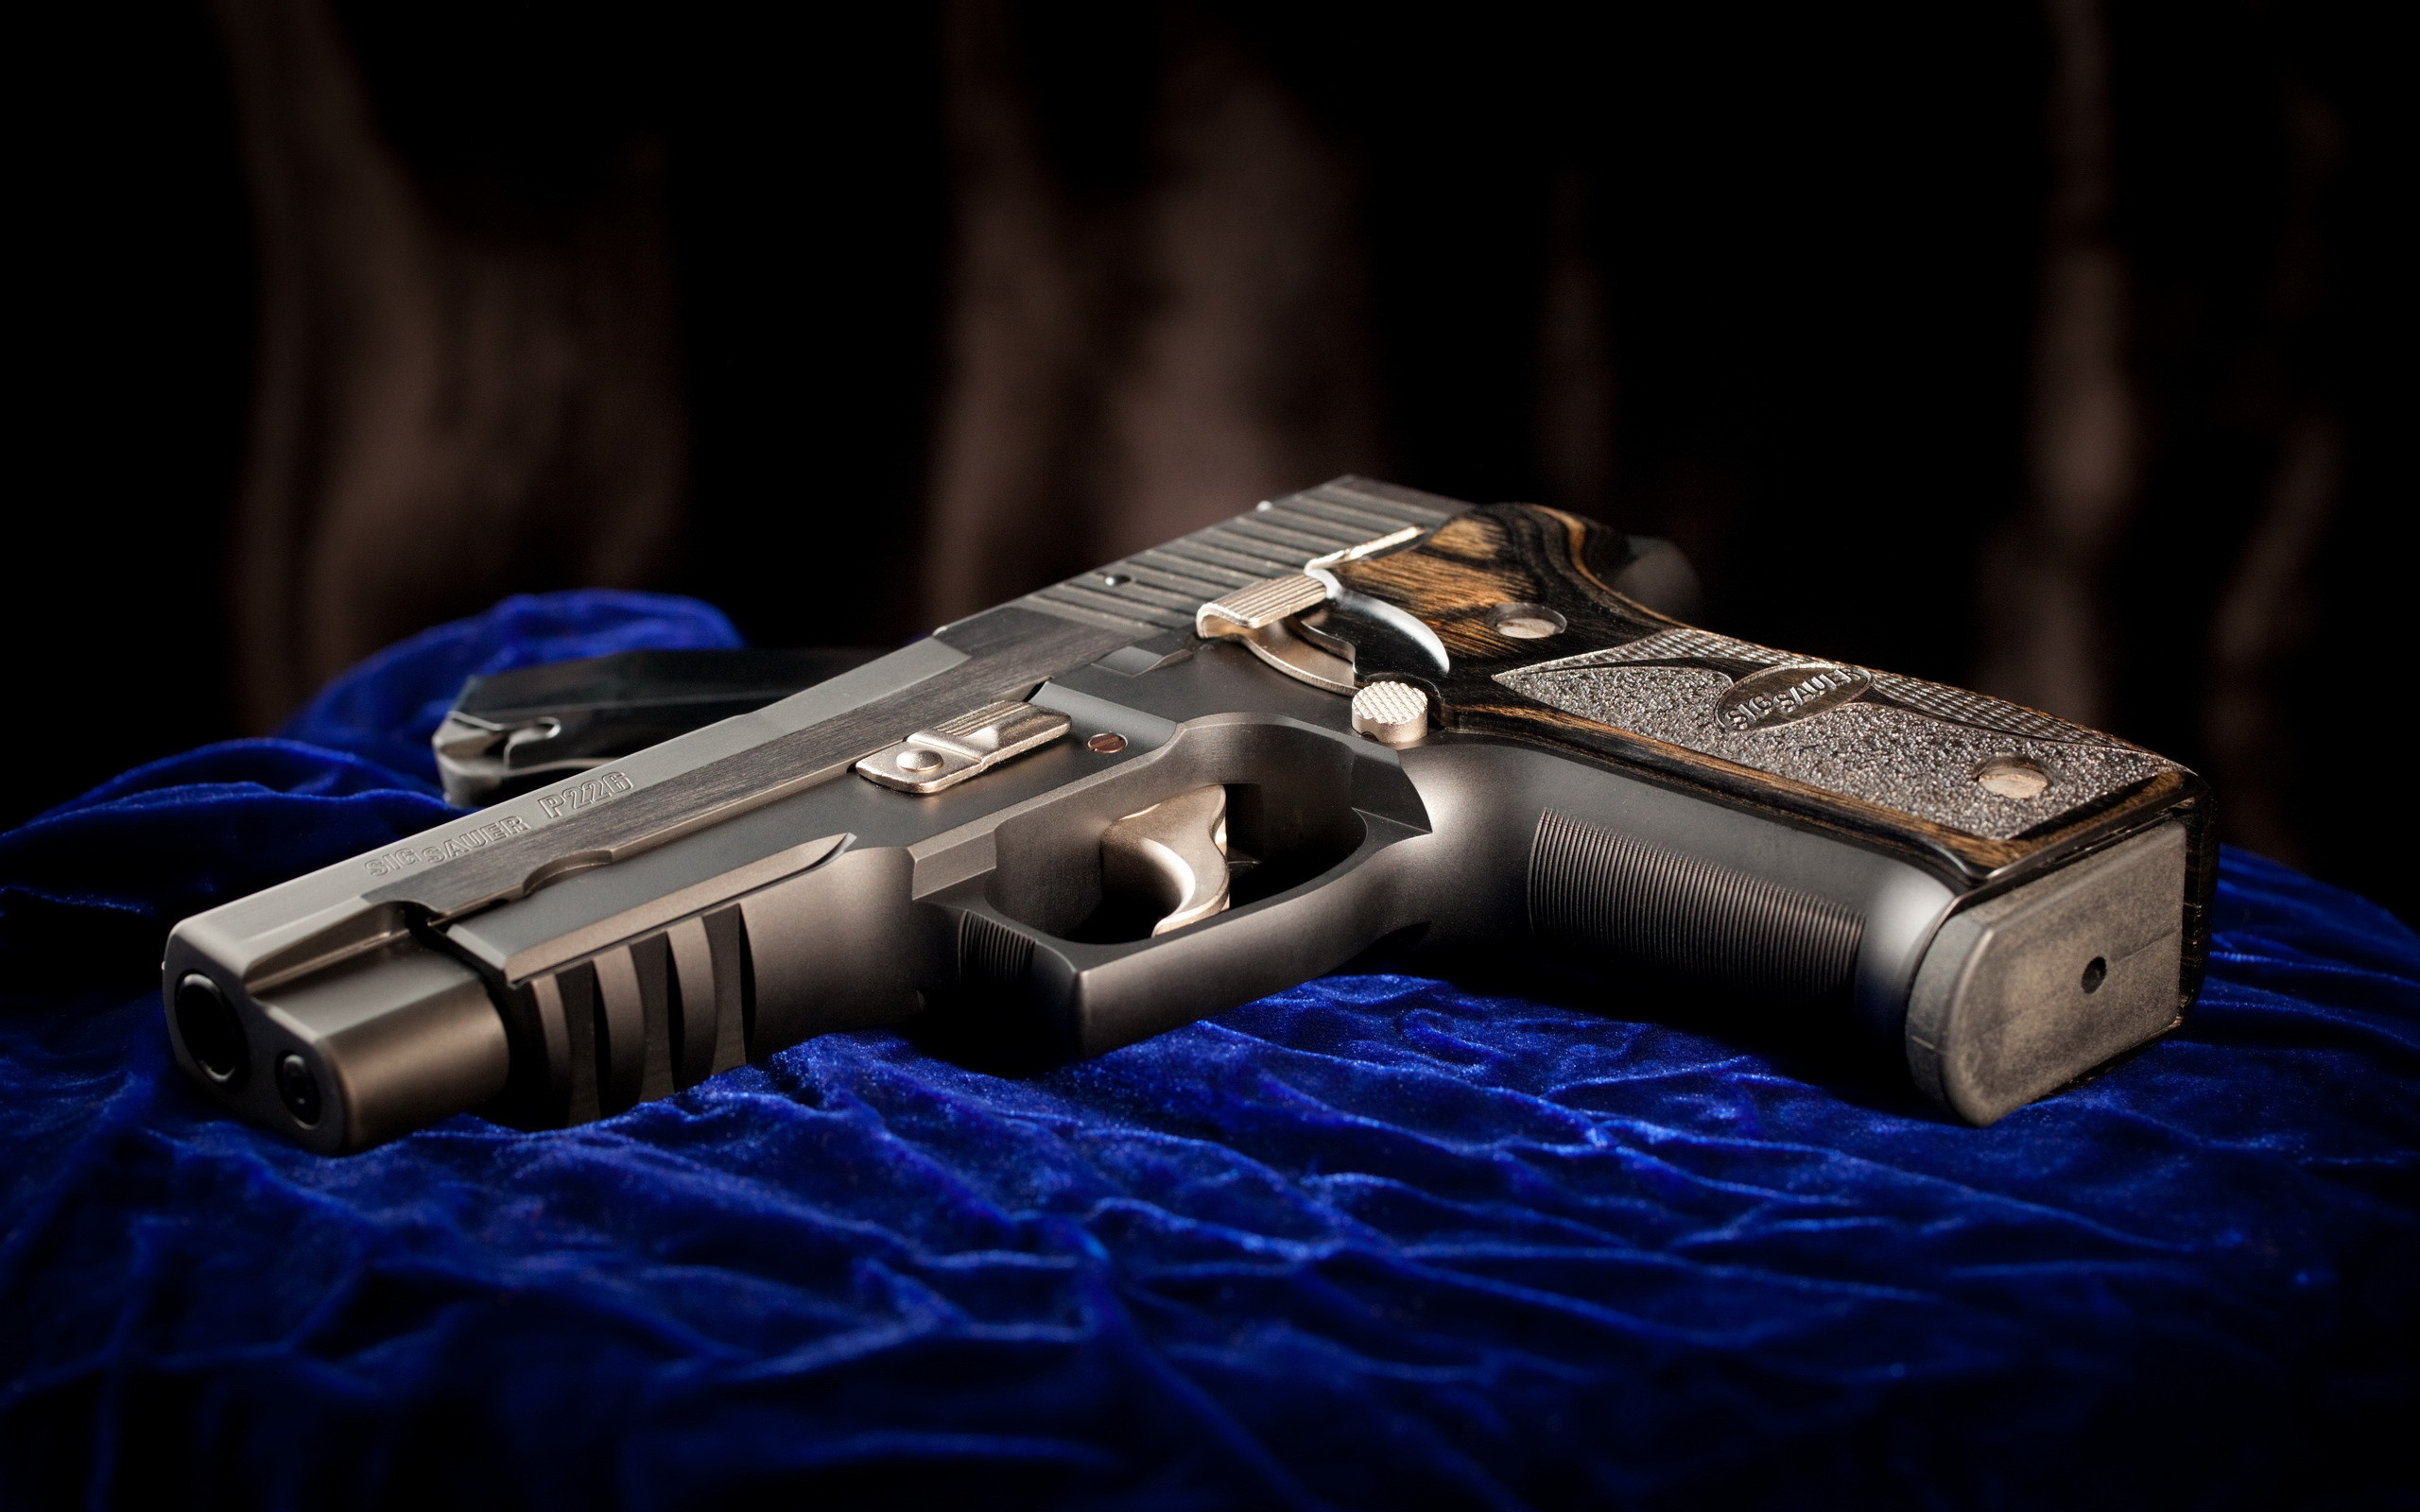 2560x1600 Sig Sauer Logo Wallpaper 89719 just feel free and have all the desired .